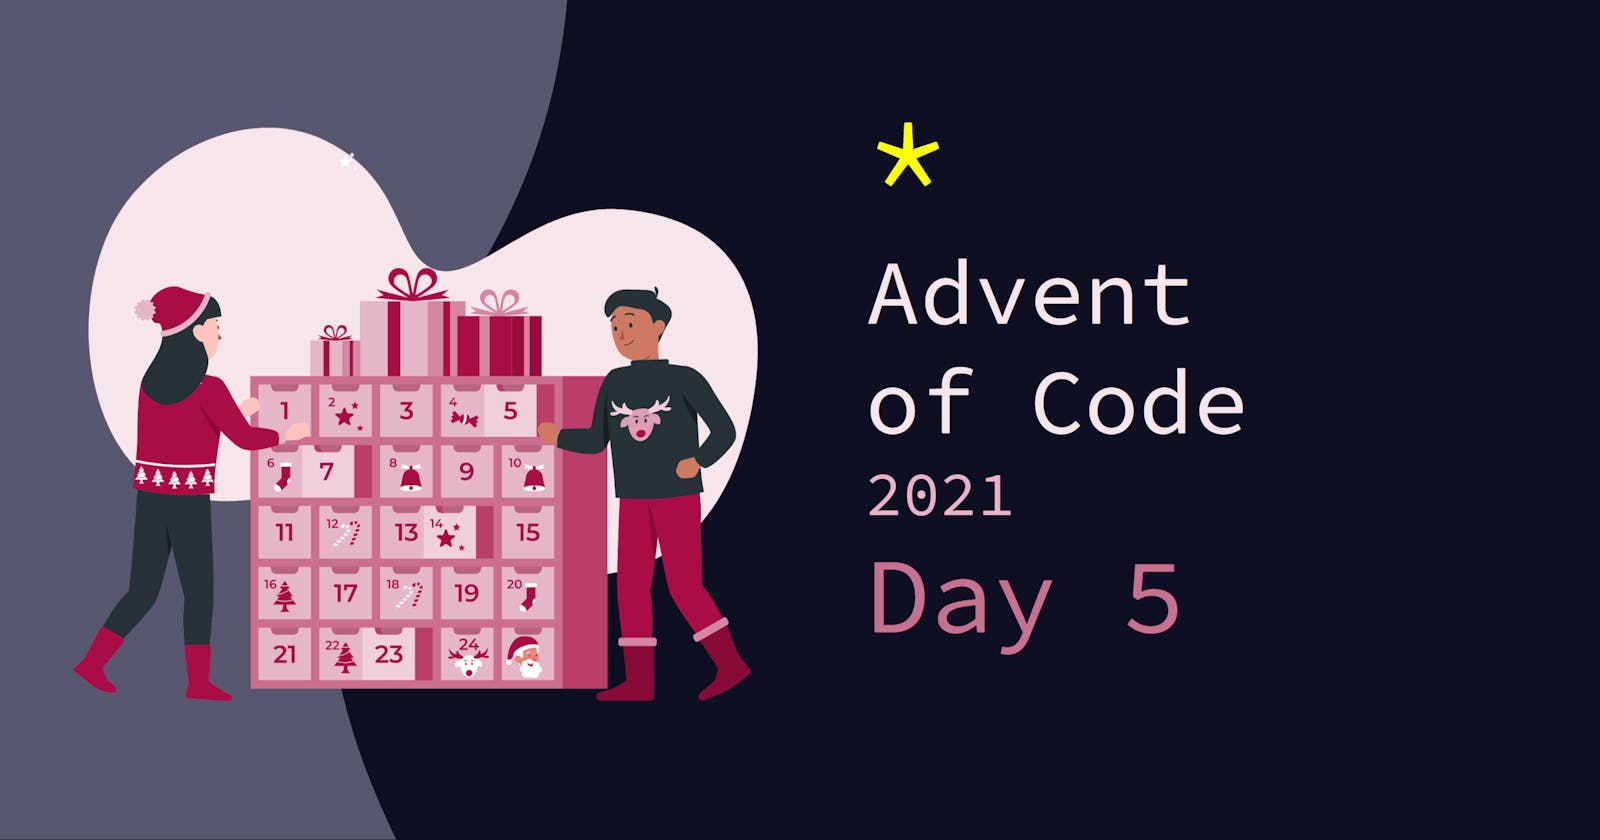 Advent of Code 2021: Day 5